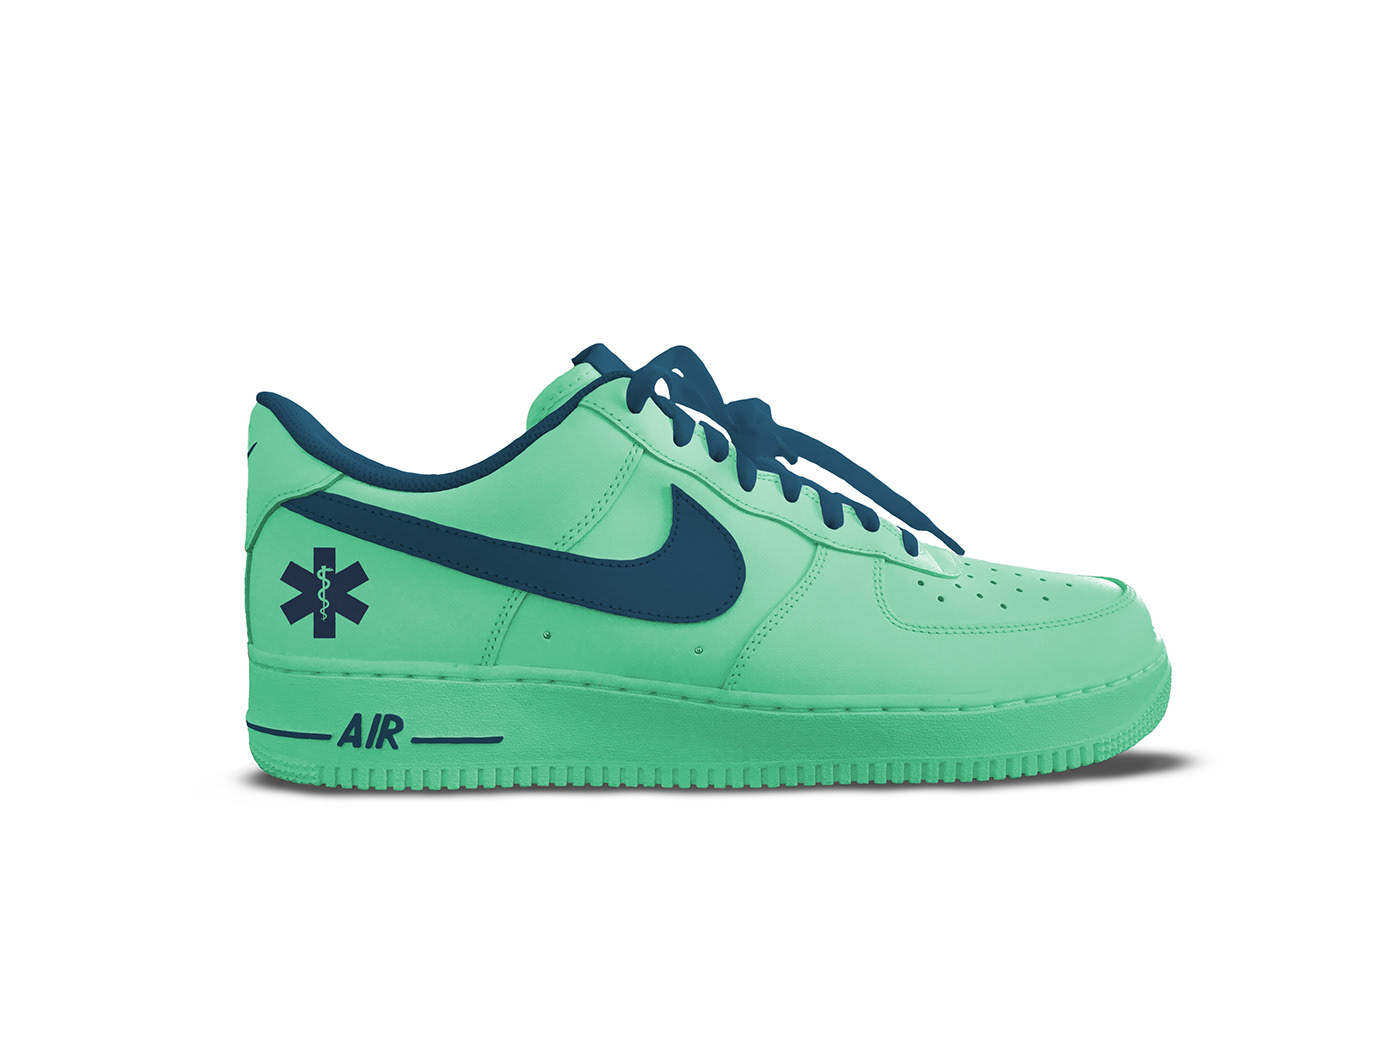 Air Force 1s air force ones low tops Nike patrick star shoes sully